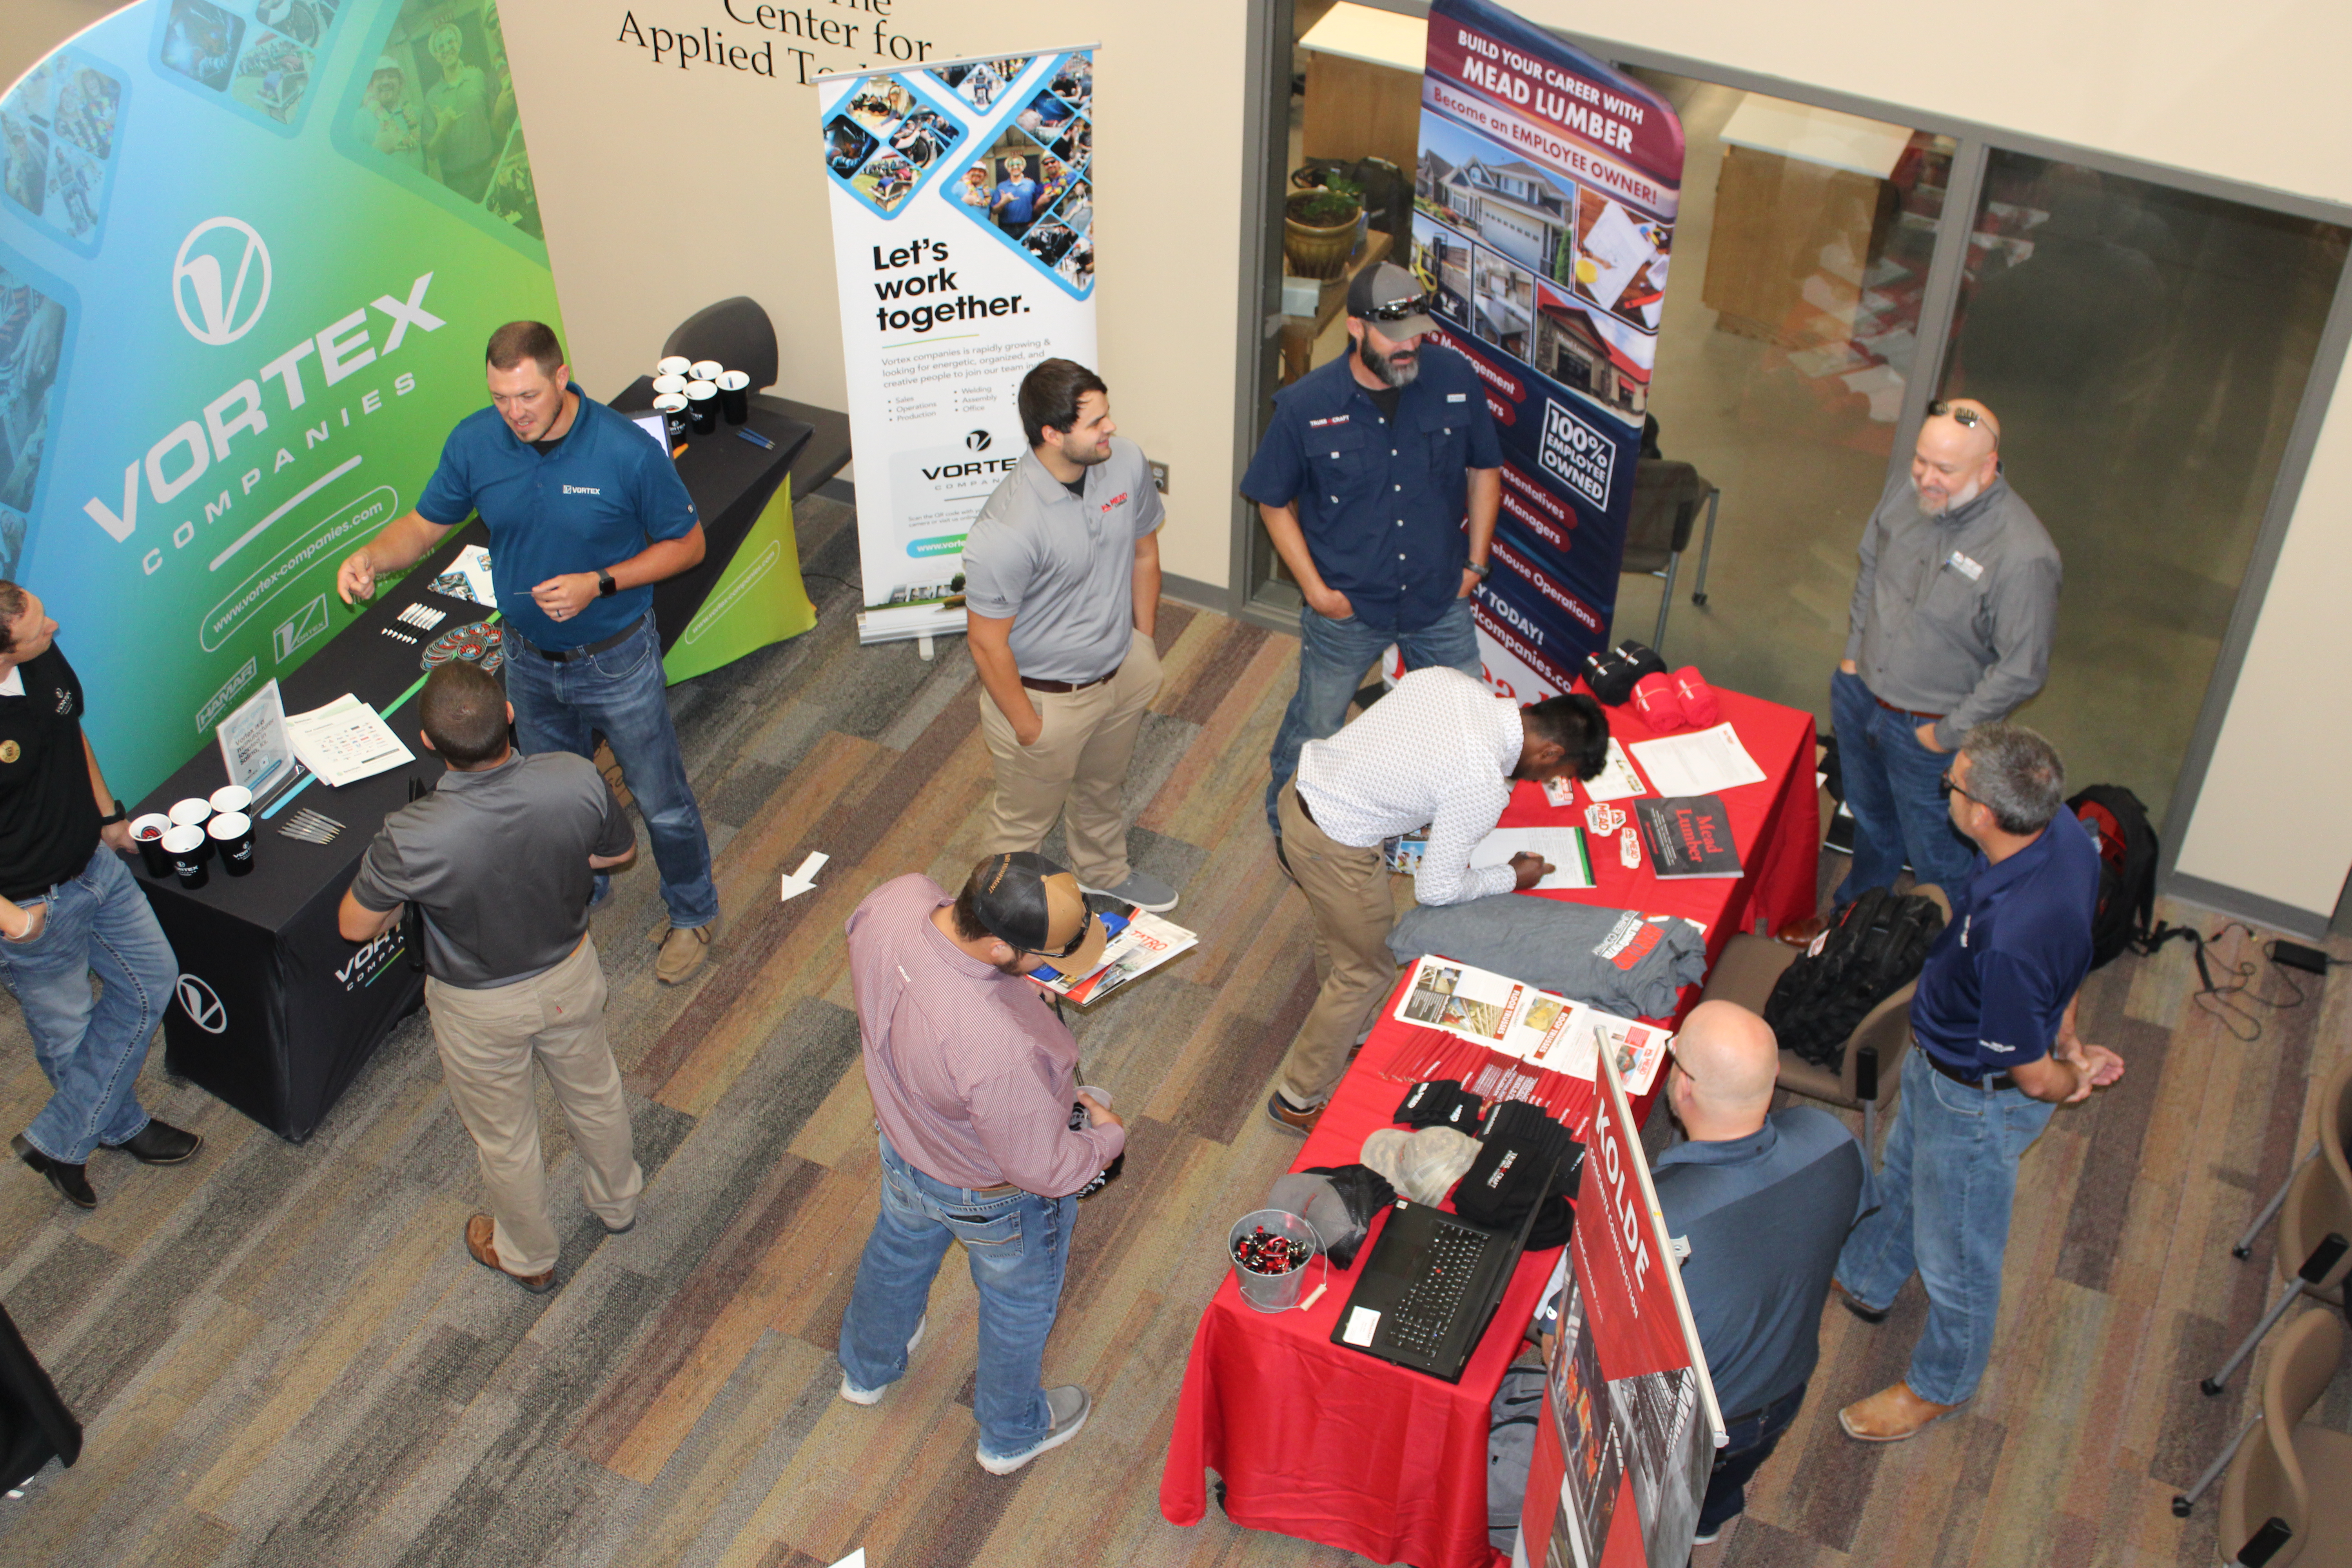 The Applied Technology Career Day brought employers to the FHSU campus to present career opportunities to students from FHSU, NCK Tech and Northwest Tech